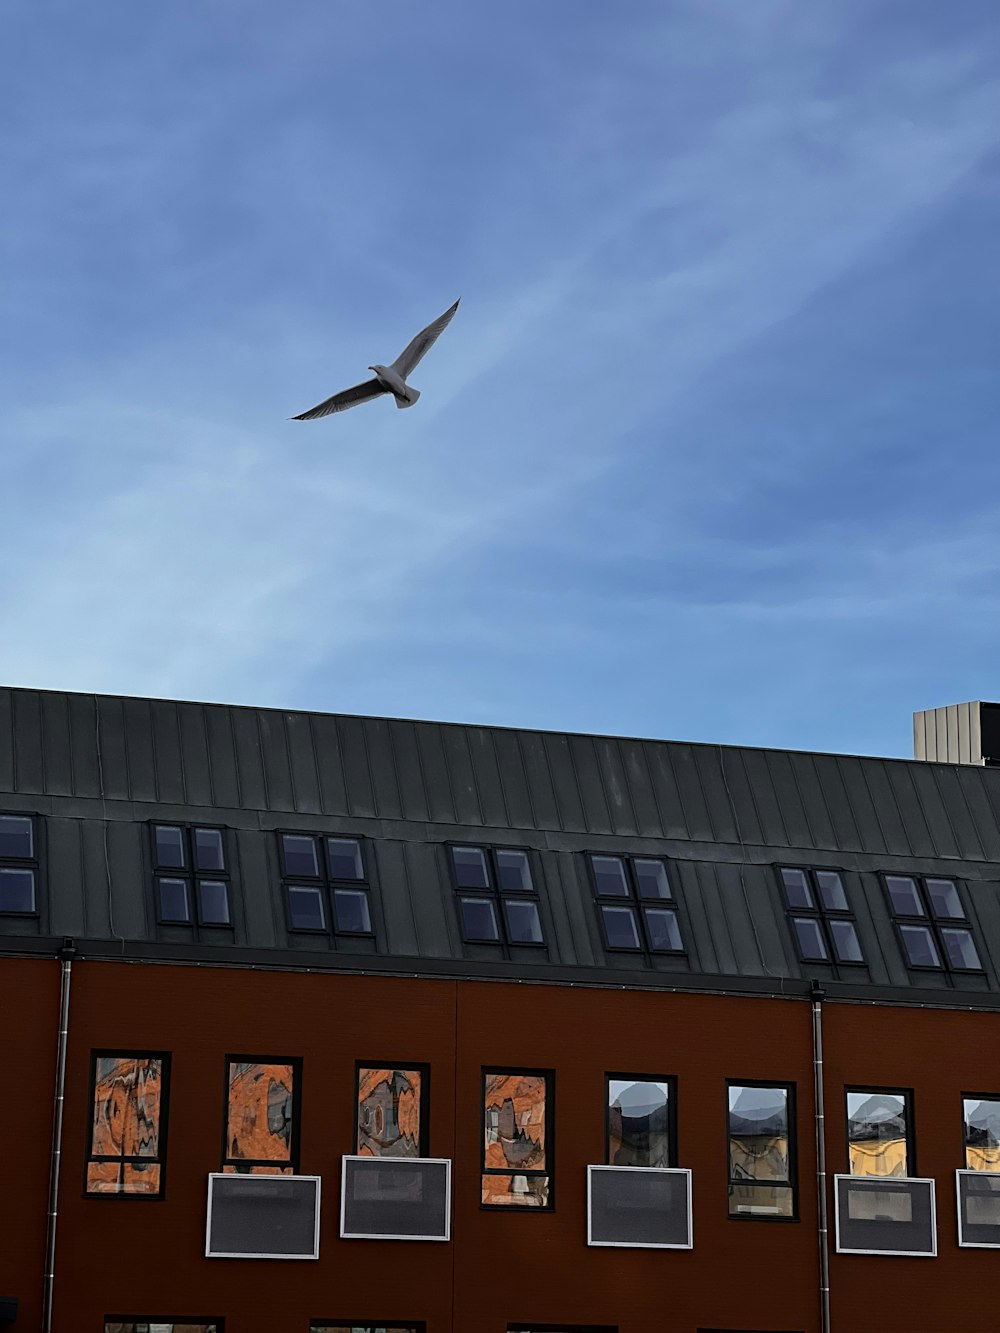 a bird flying over a building with windows